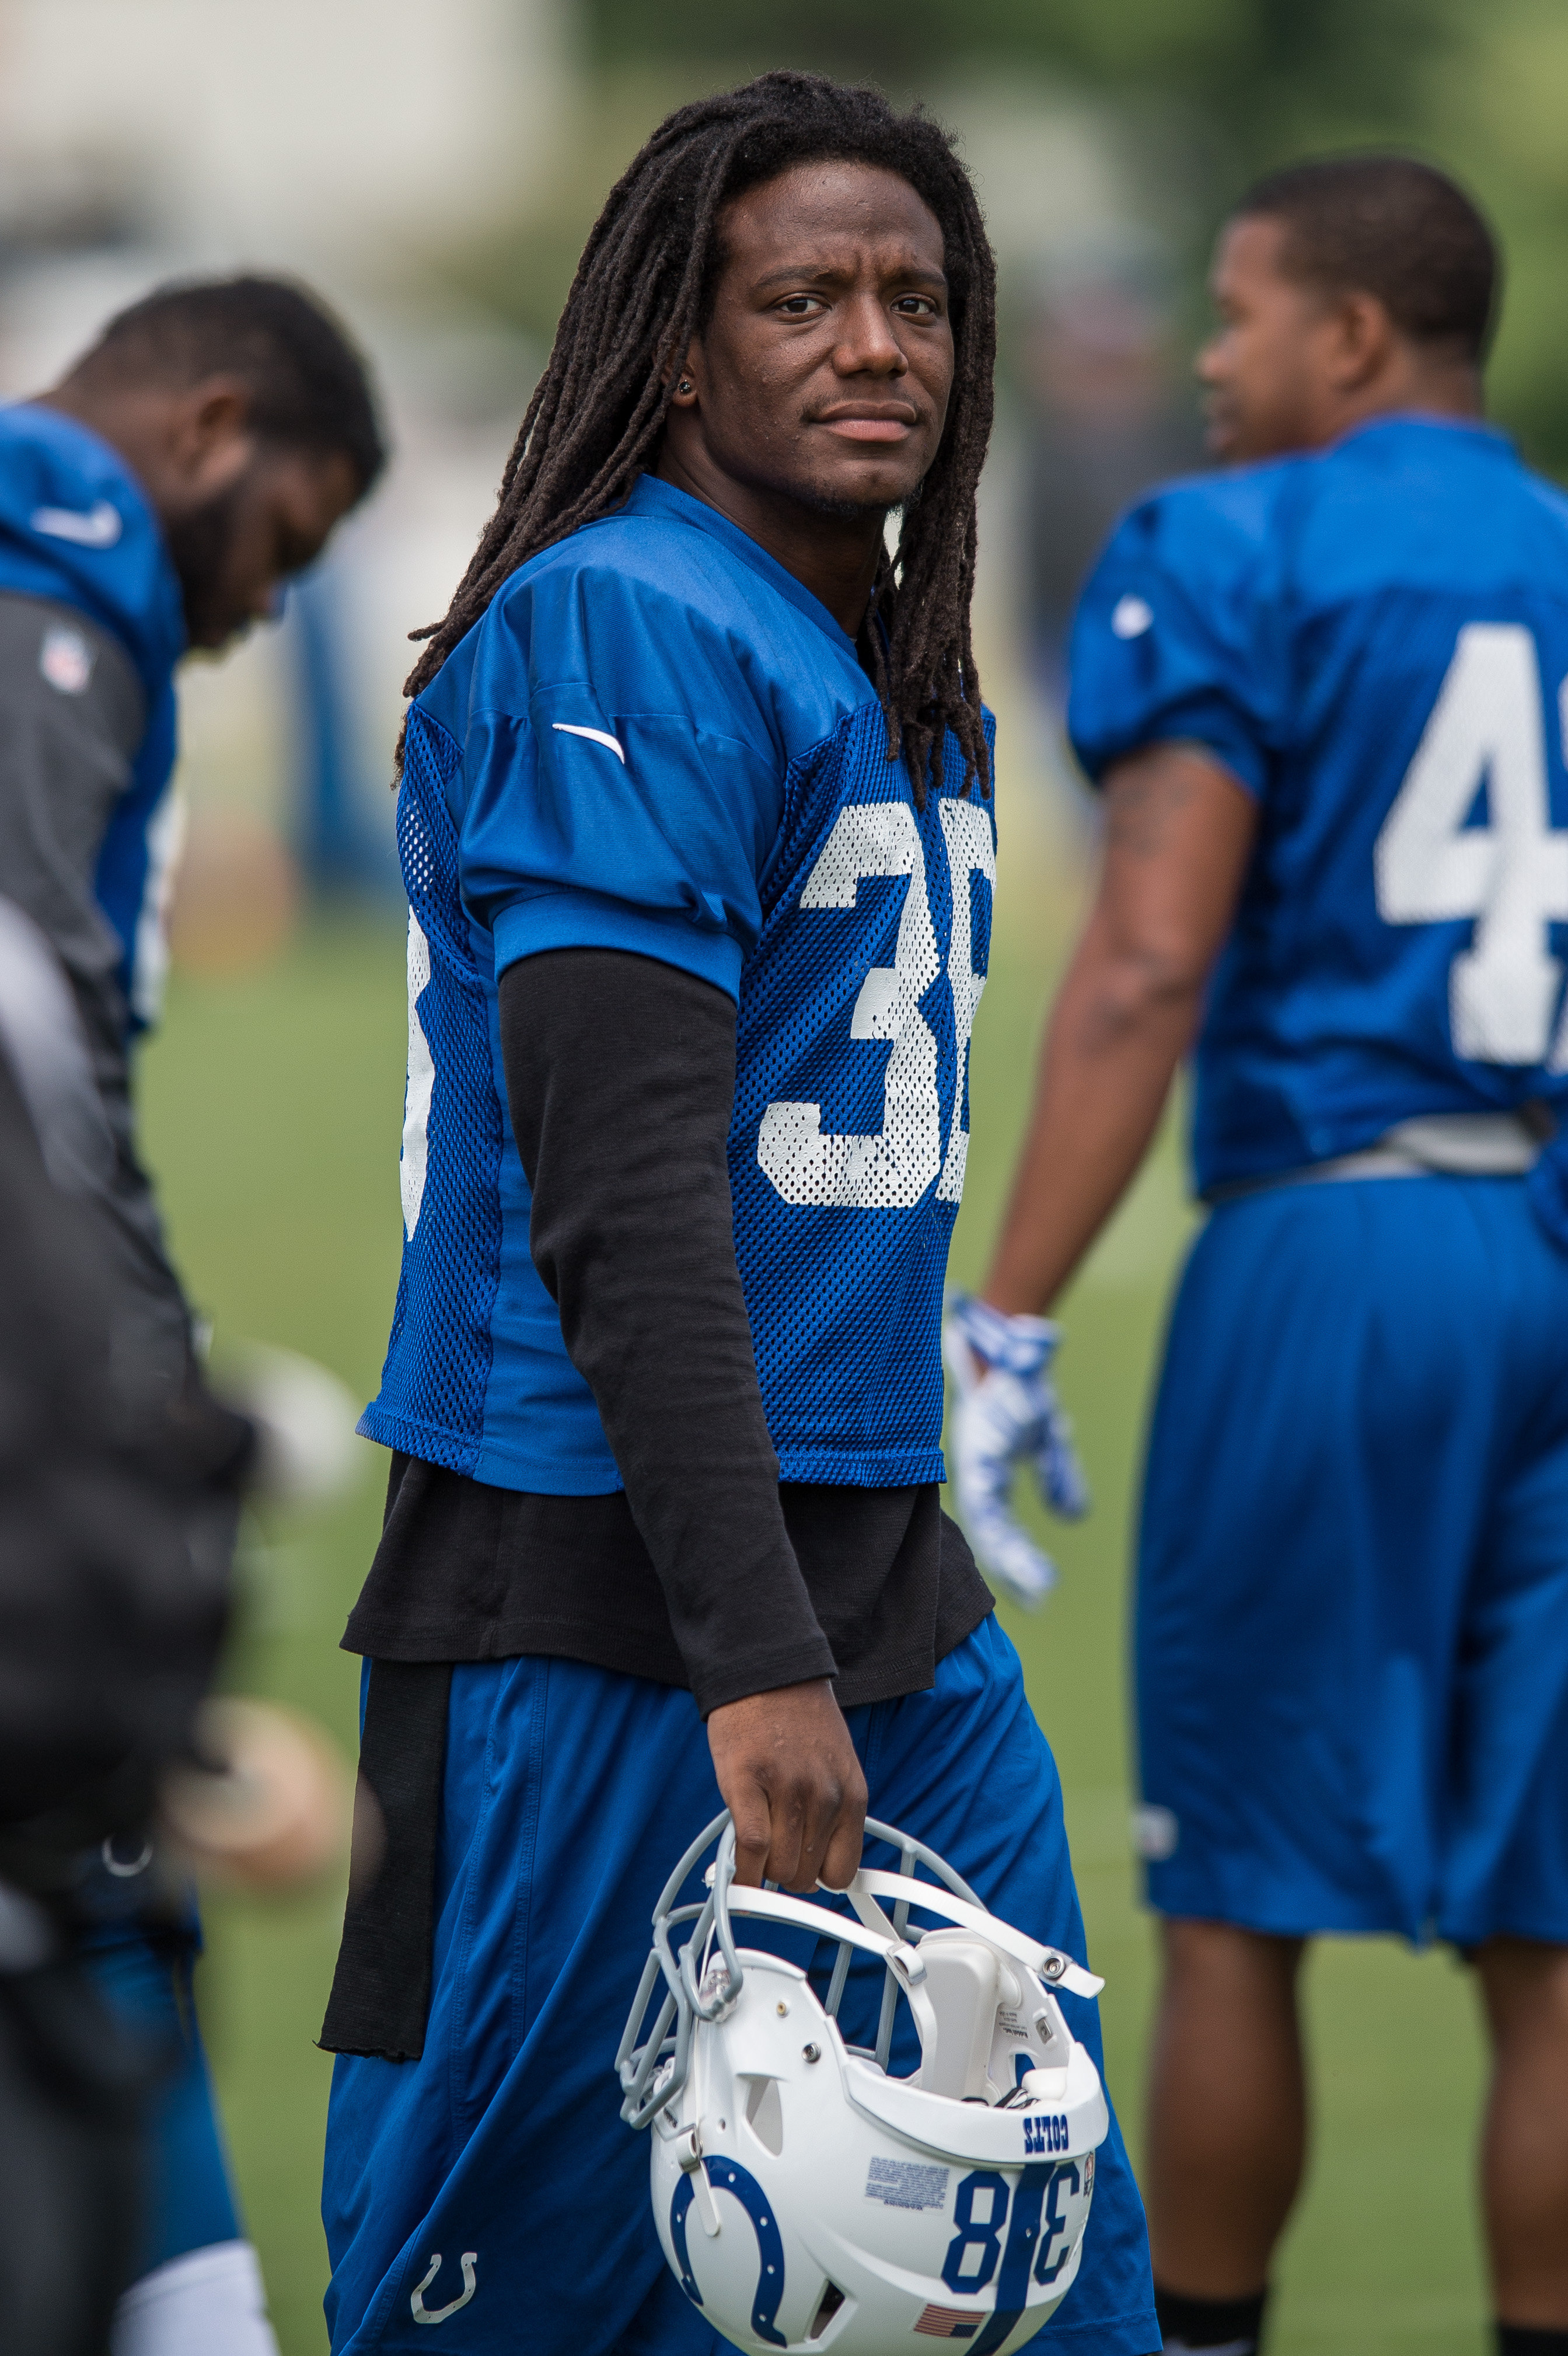 Sergio Brown of the Indianapolis Colts on the sidelines before a training camp practice session at Anderson University in Anderson, Indiana, on July 24, 2014 | Source: Getty Images